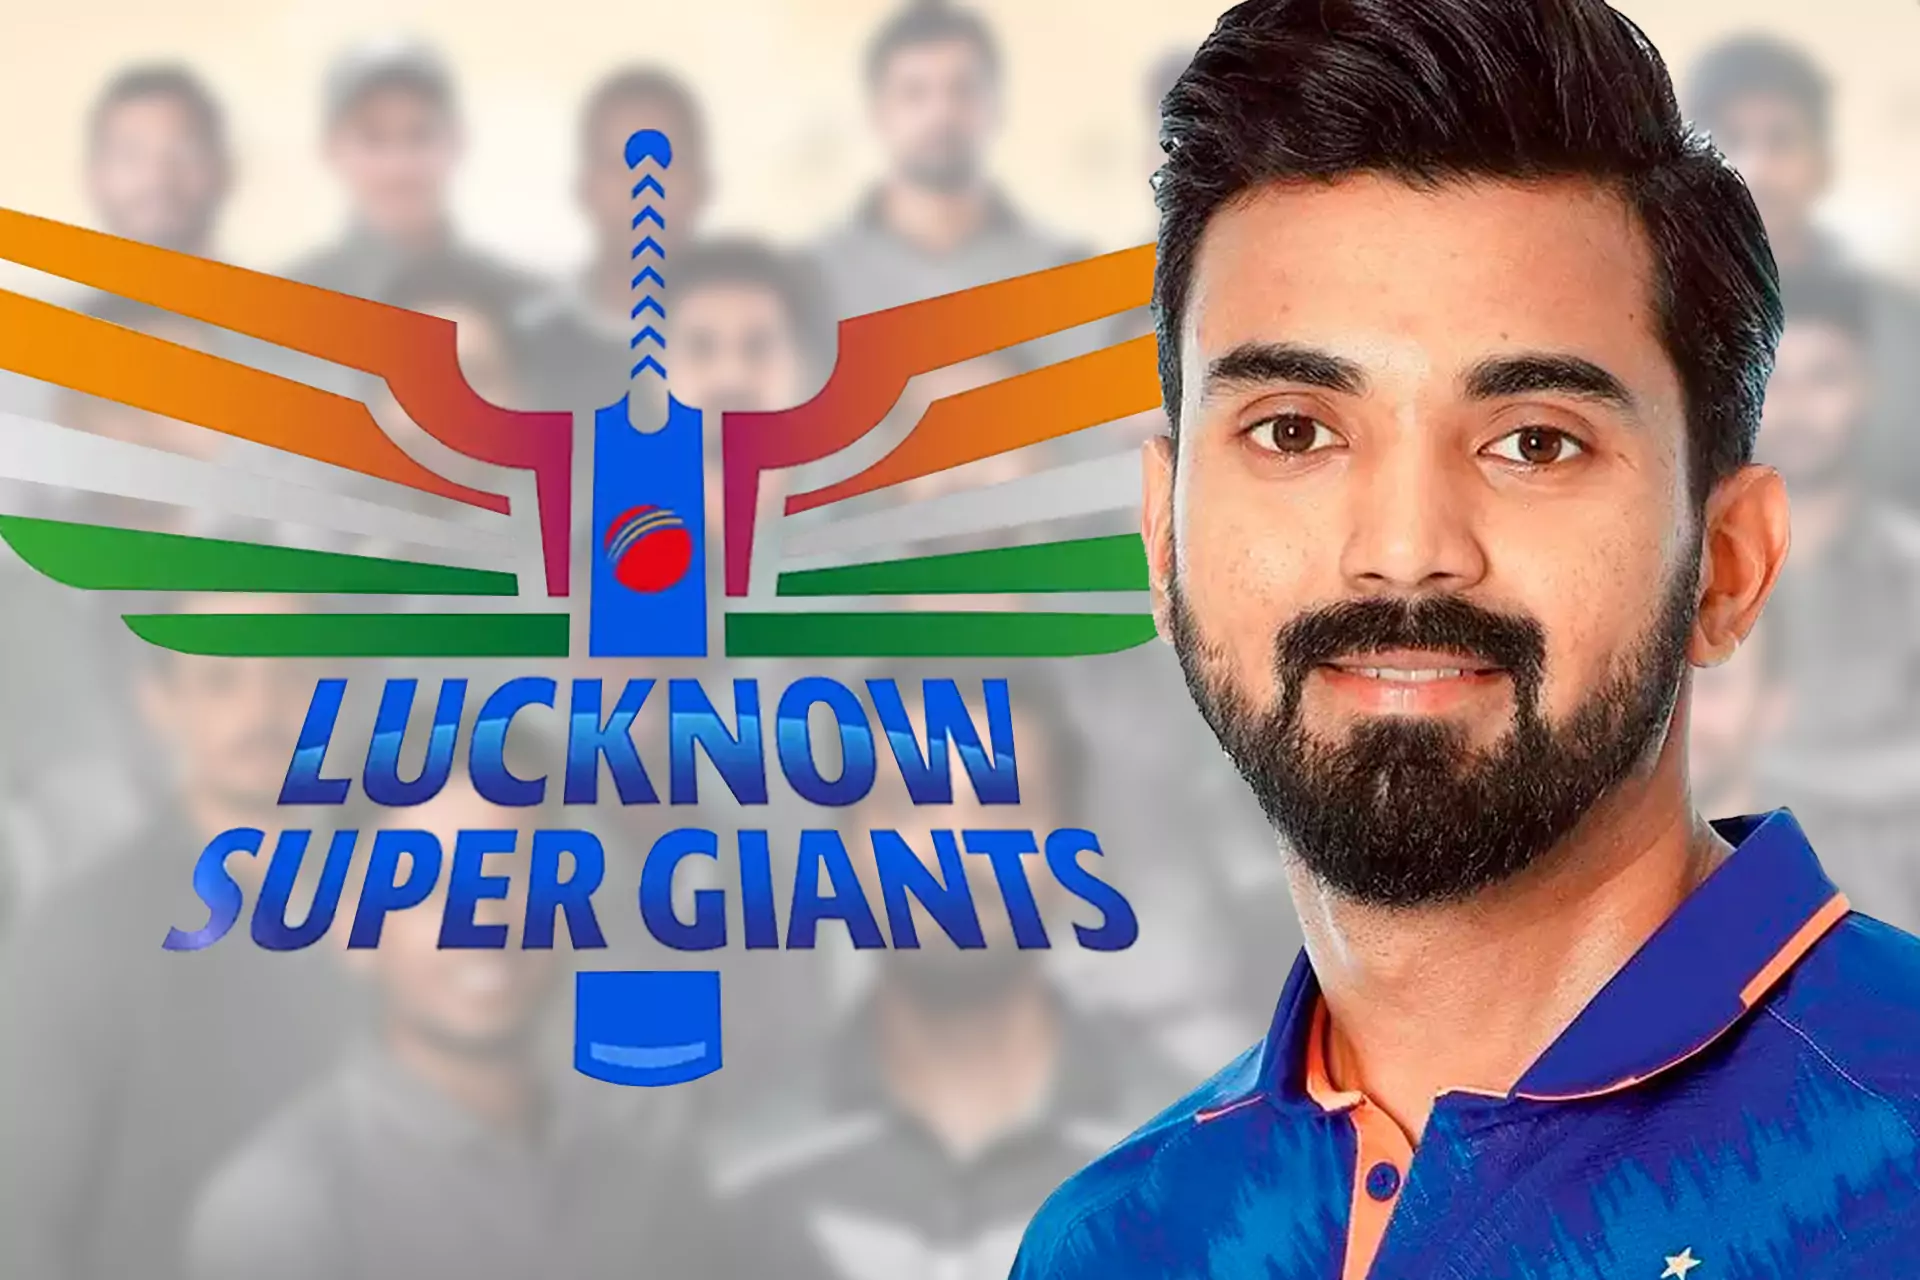 The Lucknow Super Giants are a new team in IPL 2022.